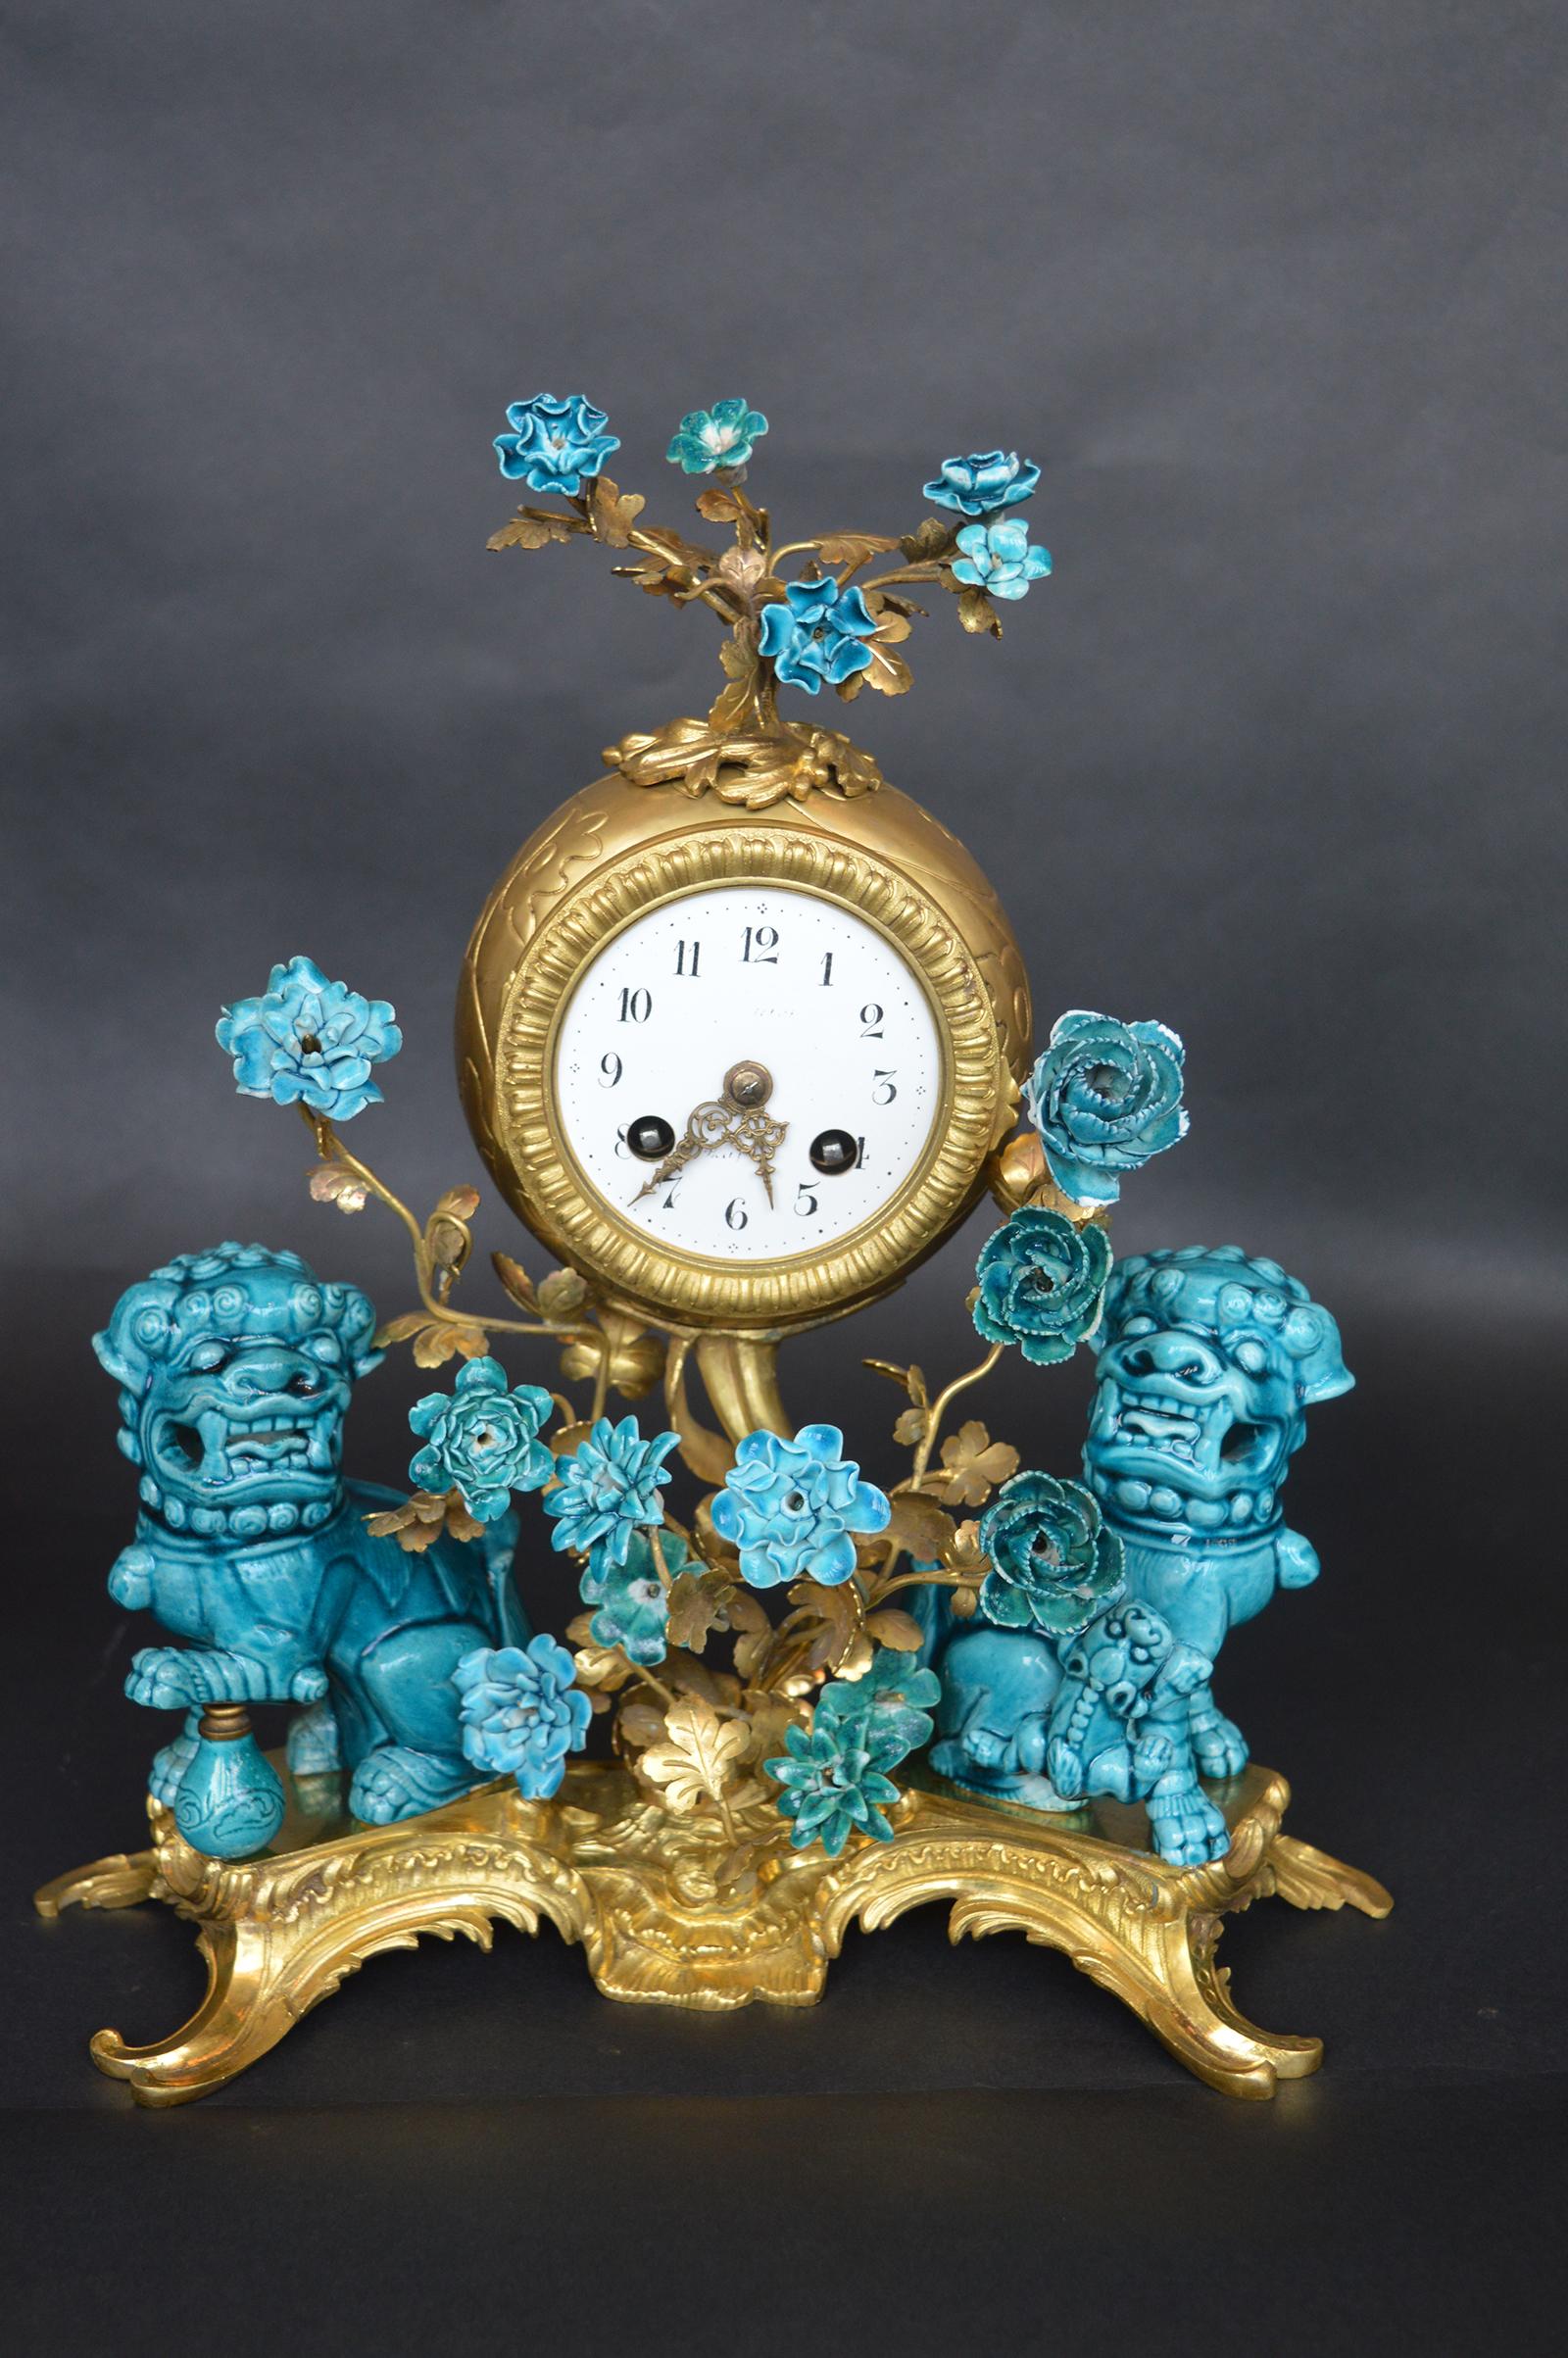 A French Rococo chinoiserie style three-piece gilt bronze and porcelain clock garniture, circa 1900, comprising a gilt bronze mantel (fireplace) clock surmounted with turquoise glazed floral blossoms on gilt bronze wire stems over a cylindrical